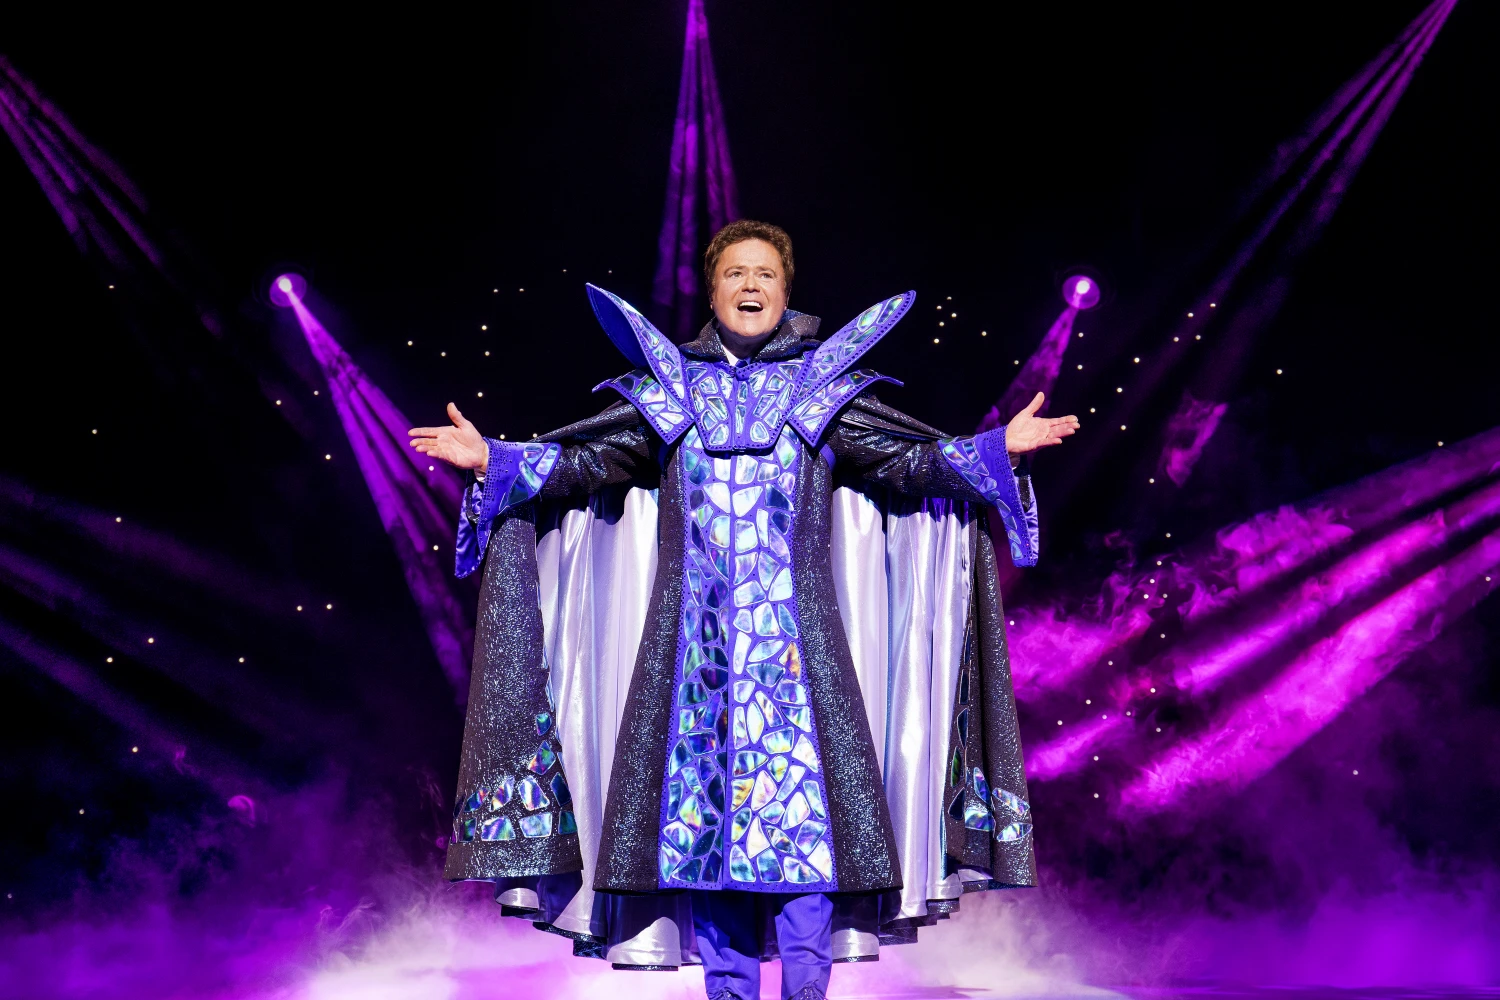 Pantoland At The Palladium: What to expect - 6